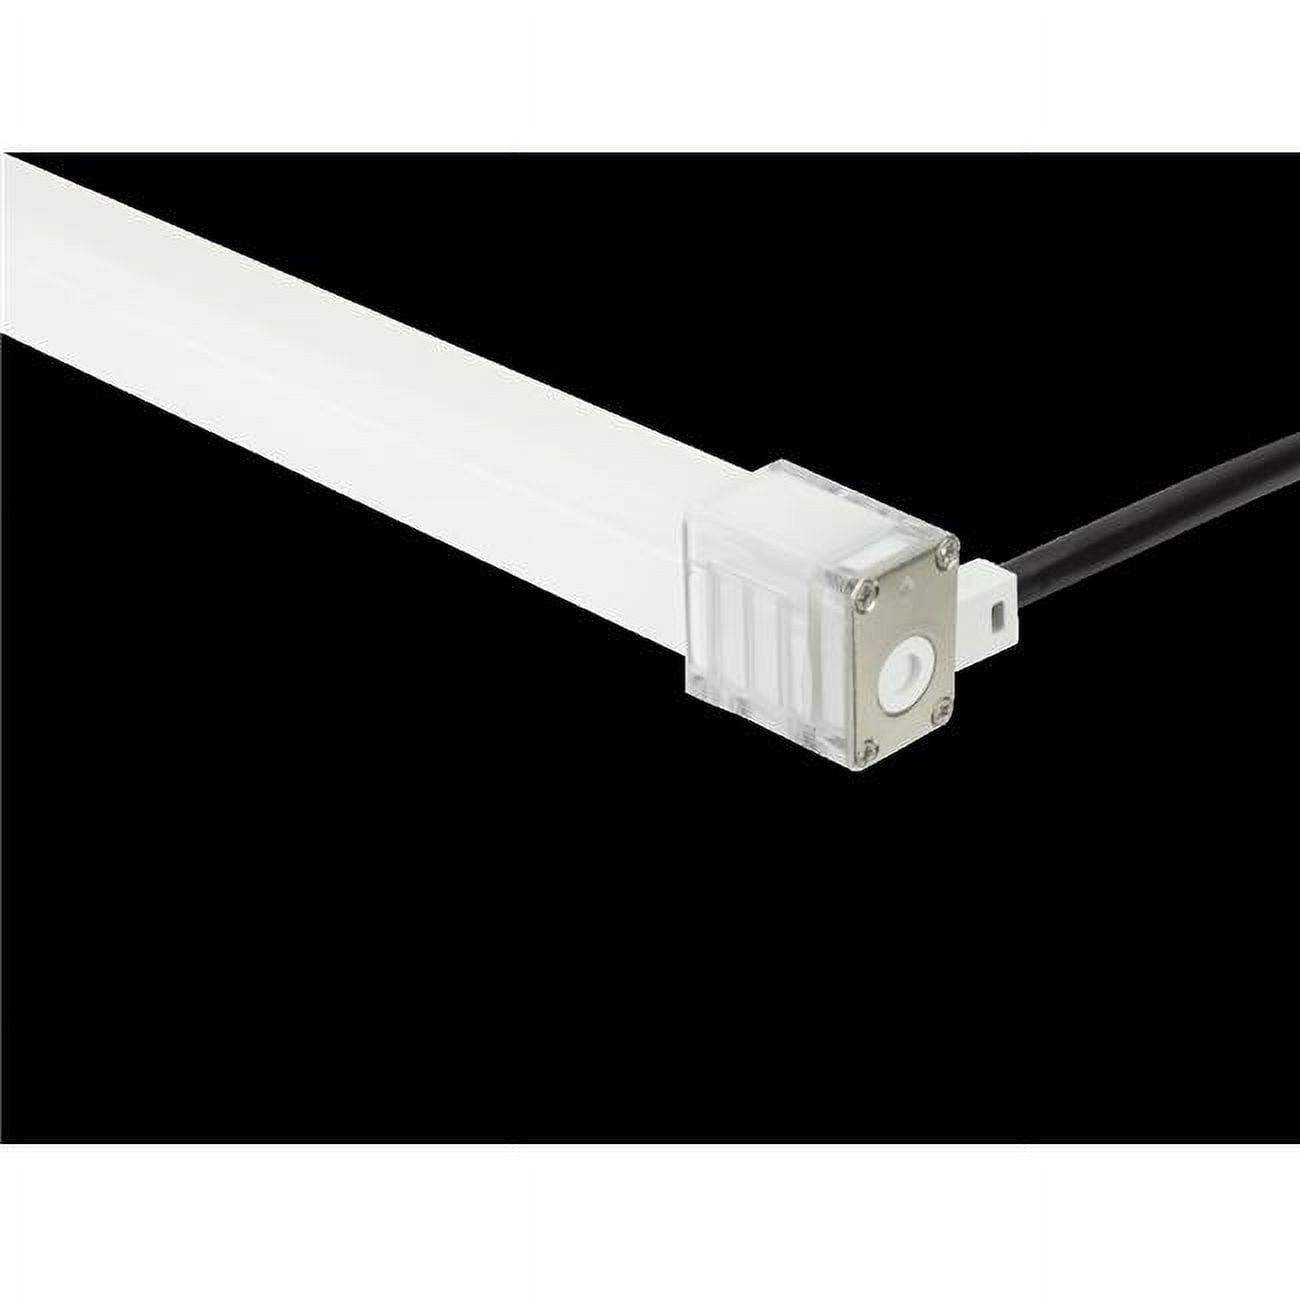 NFPROL-CONKIT-2PIN-SIDR 36 in. NeonFlex L Conkit Power Feed for Lateral, 2-Pin - Side Right, White -  American Lighting